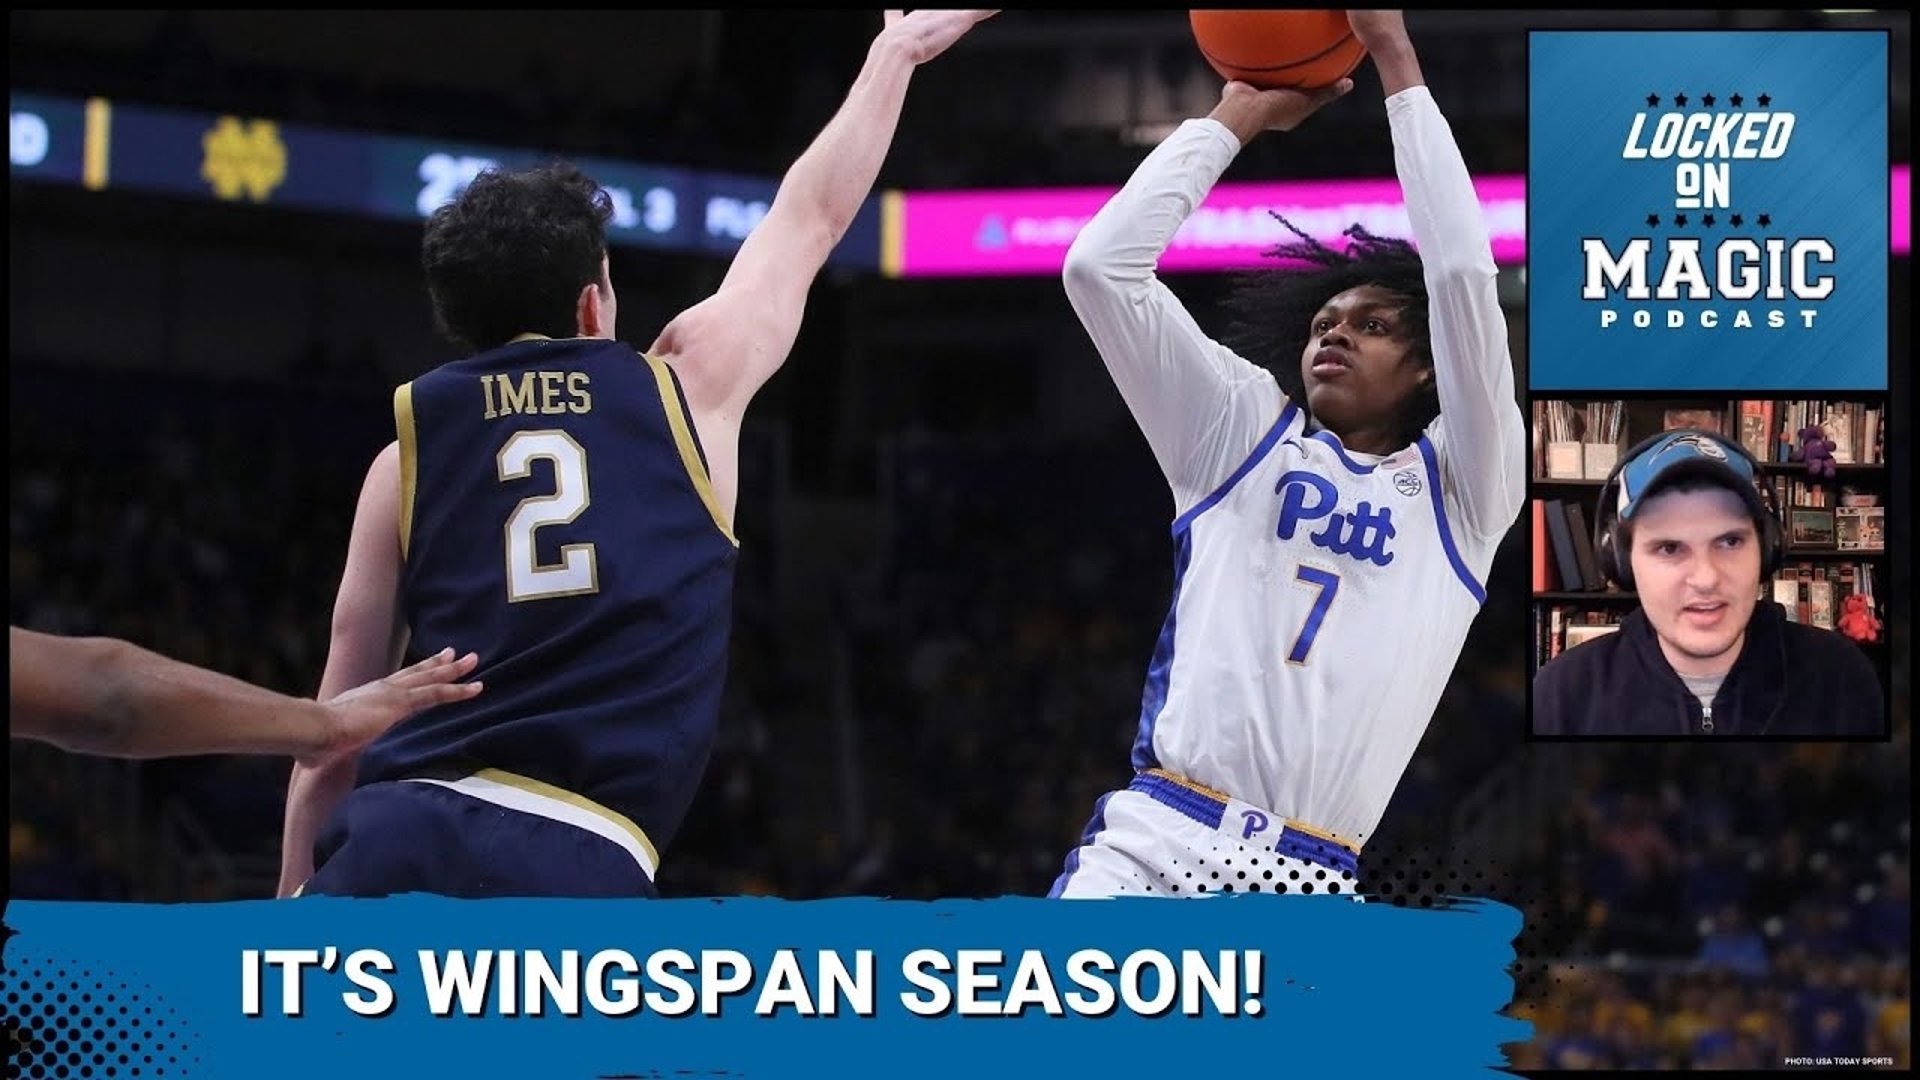 The NBA Draft Combine was last week and the Orlando Magic got to see how their favorite prospects measure up. We all know the Magic like to check the wingspan box.